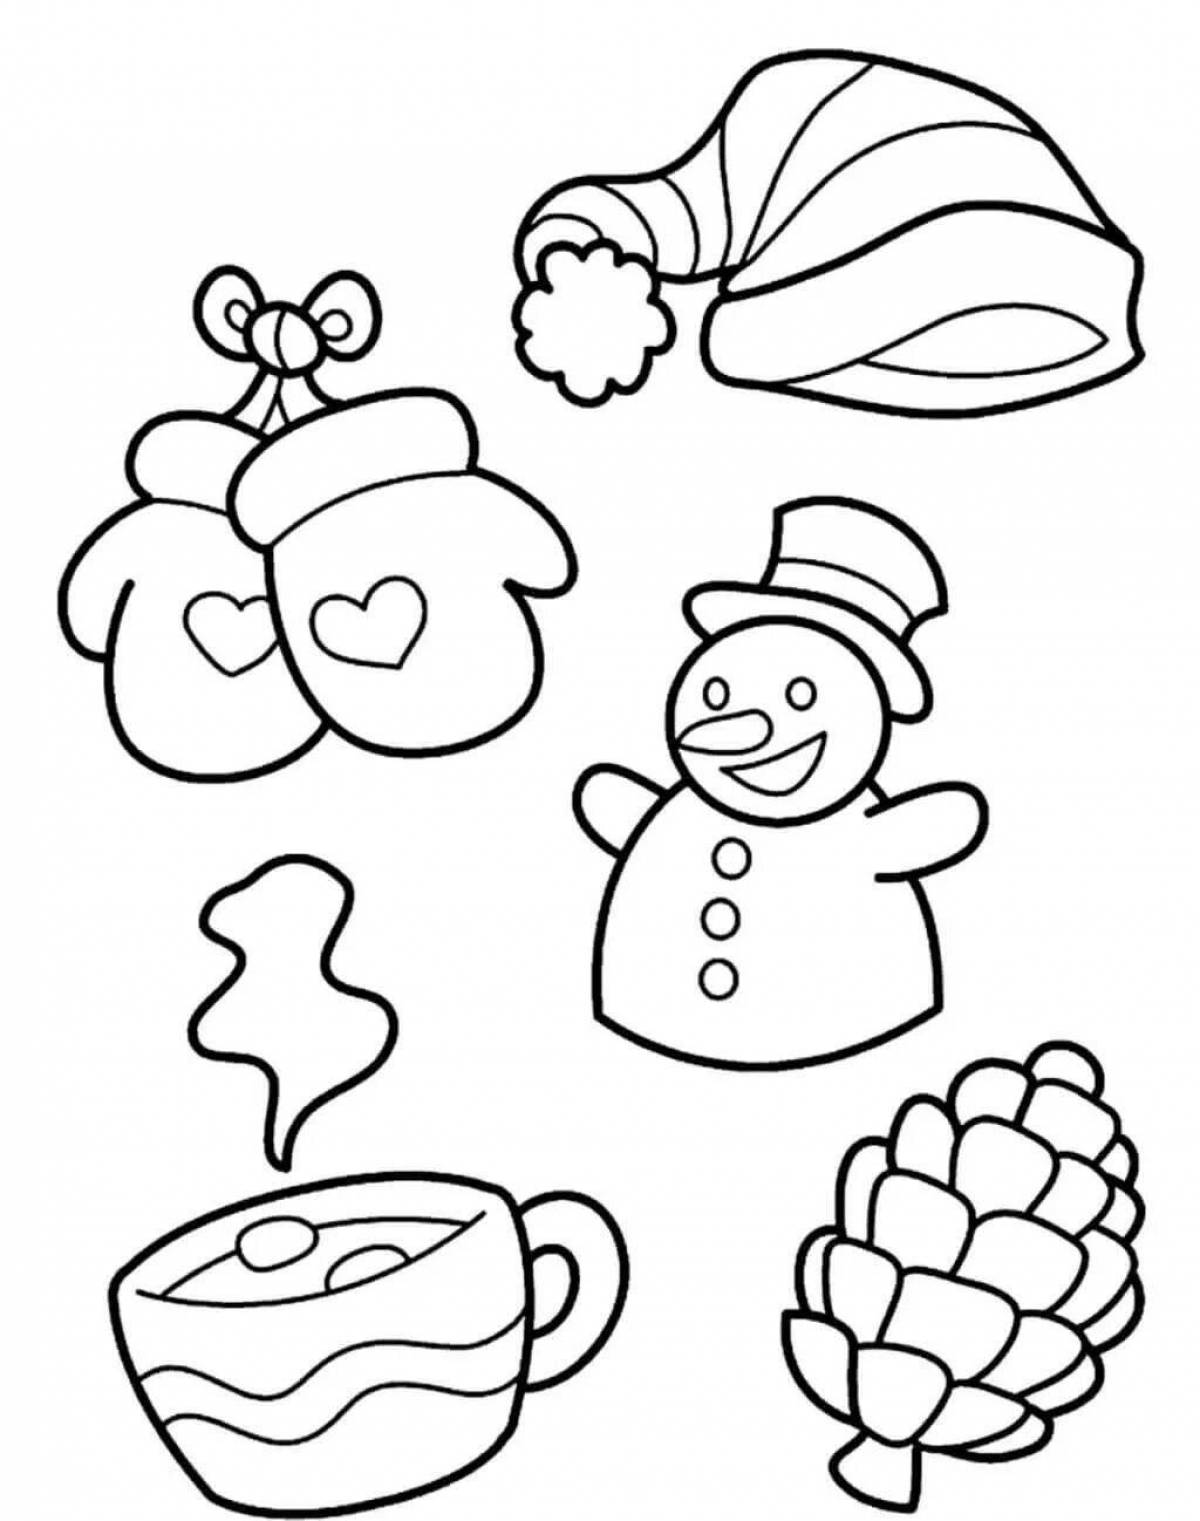 Amazing winter coloring book for 3-4 year olds